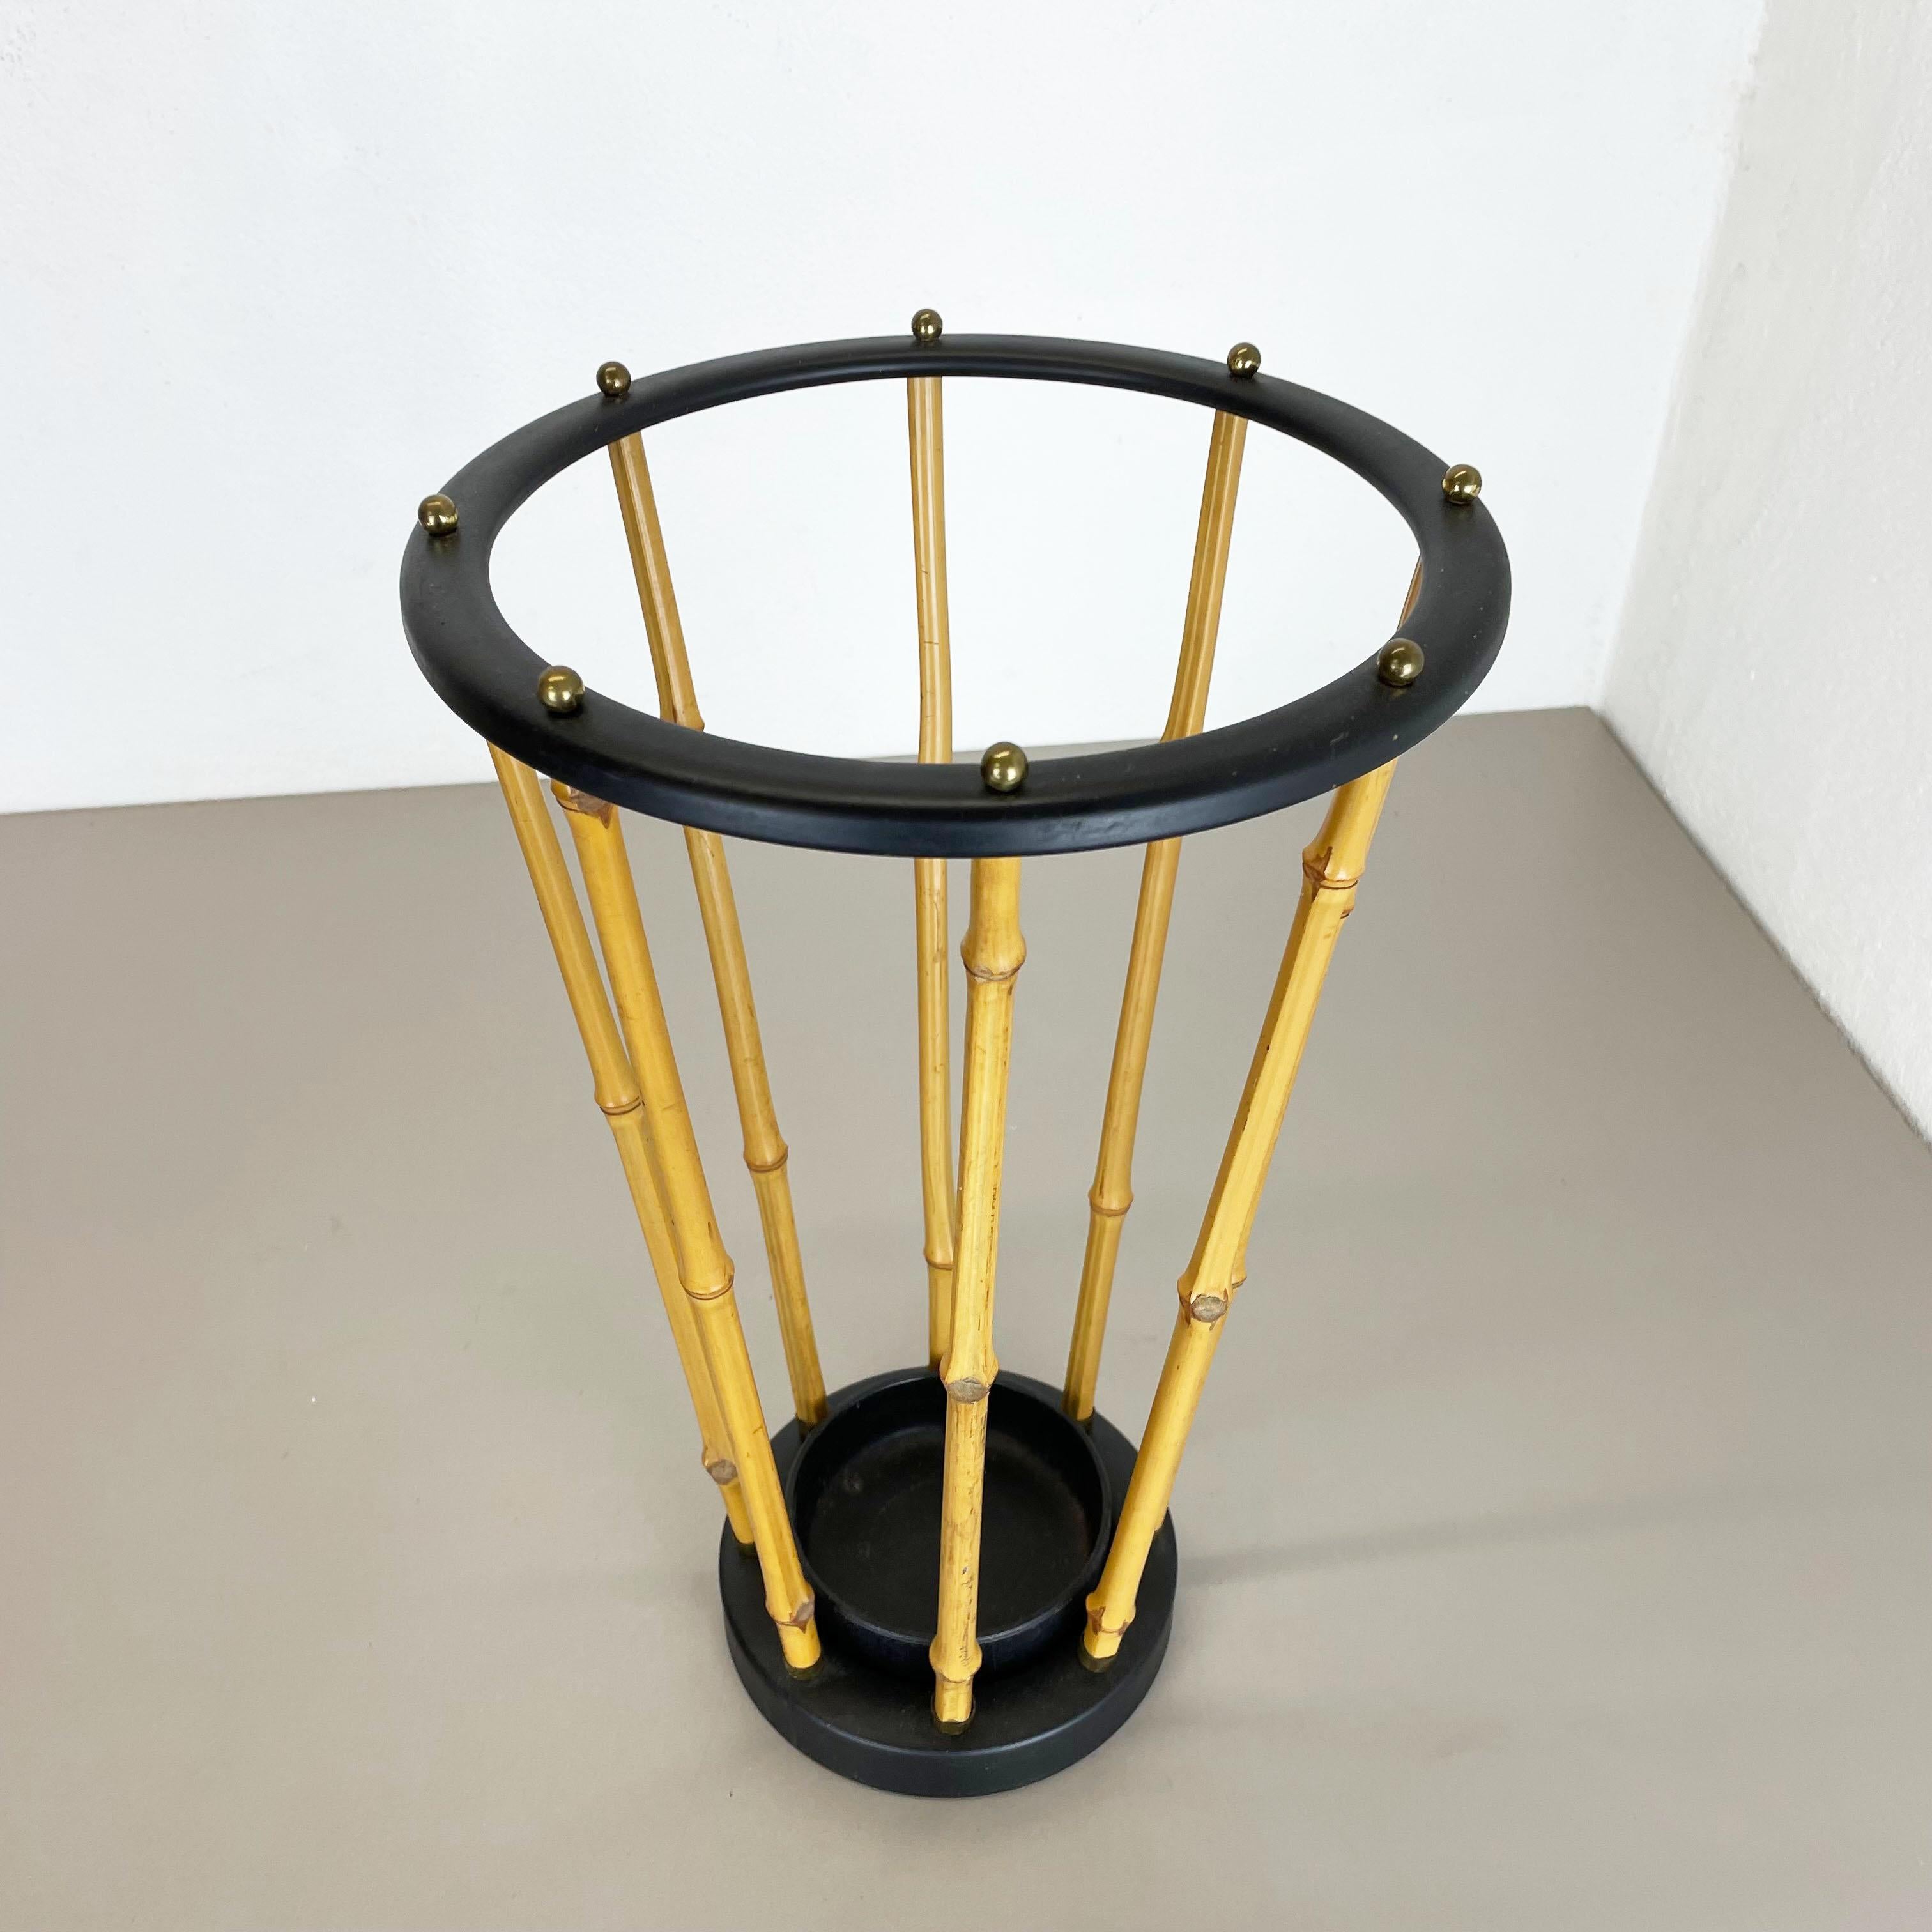 Bauhaus Midcentury Metal and Bamboo Auböck style Umbrella Stand, Germany, 1950s